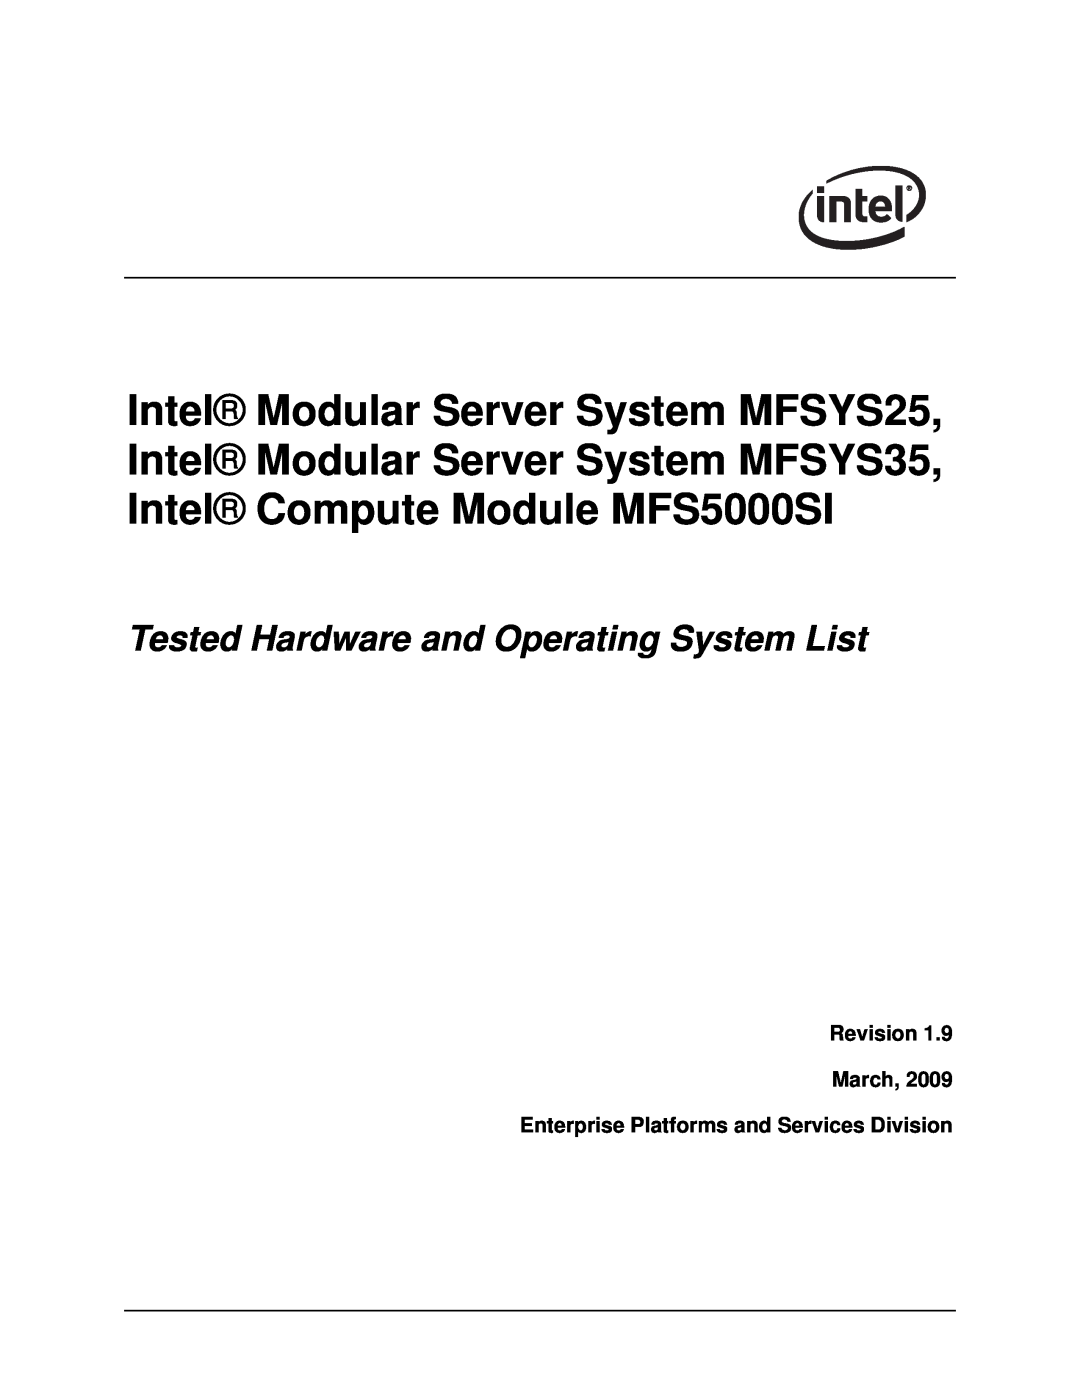 Intel MFS5000SI manual Revision March, Enterprise Platforms and Services Division, Intel Modular Server System MFSYS25 